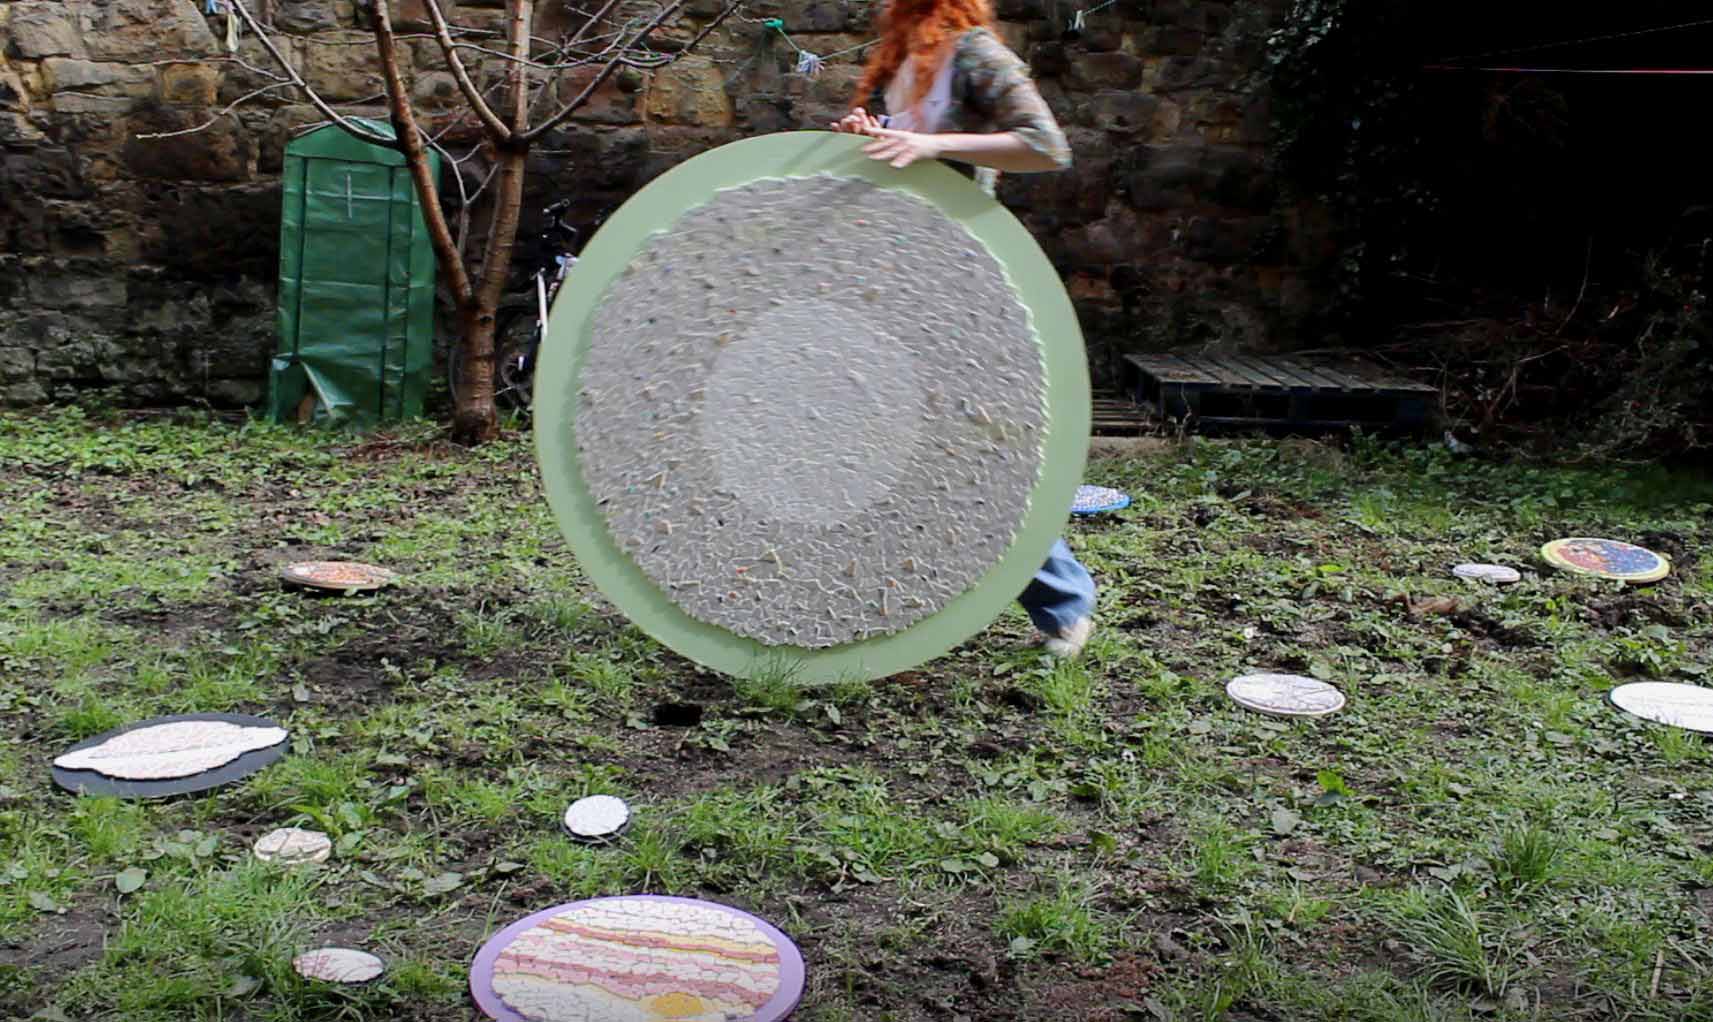 Large mosaic of the sun in grey, white and fractals of colour on green wood being rolled across grass. On the grass there are 12 other planets and astroids and moons. The person moving the sun has red hair